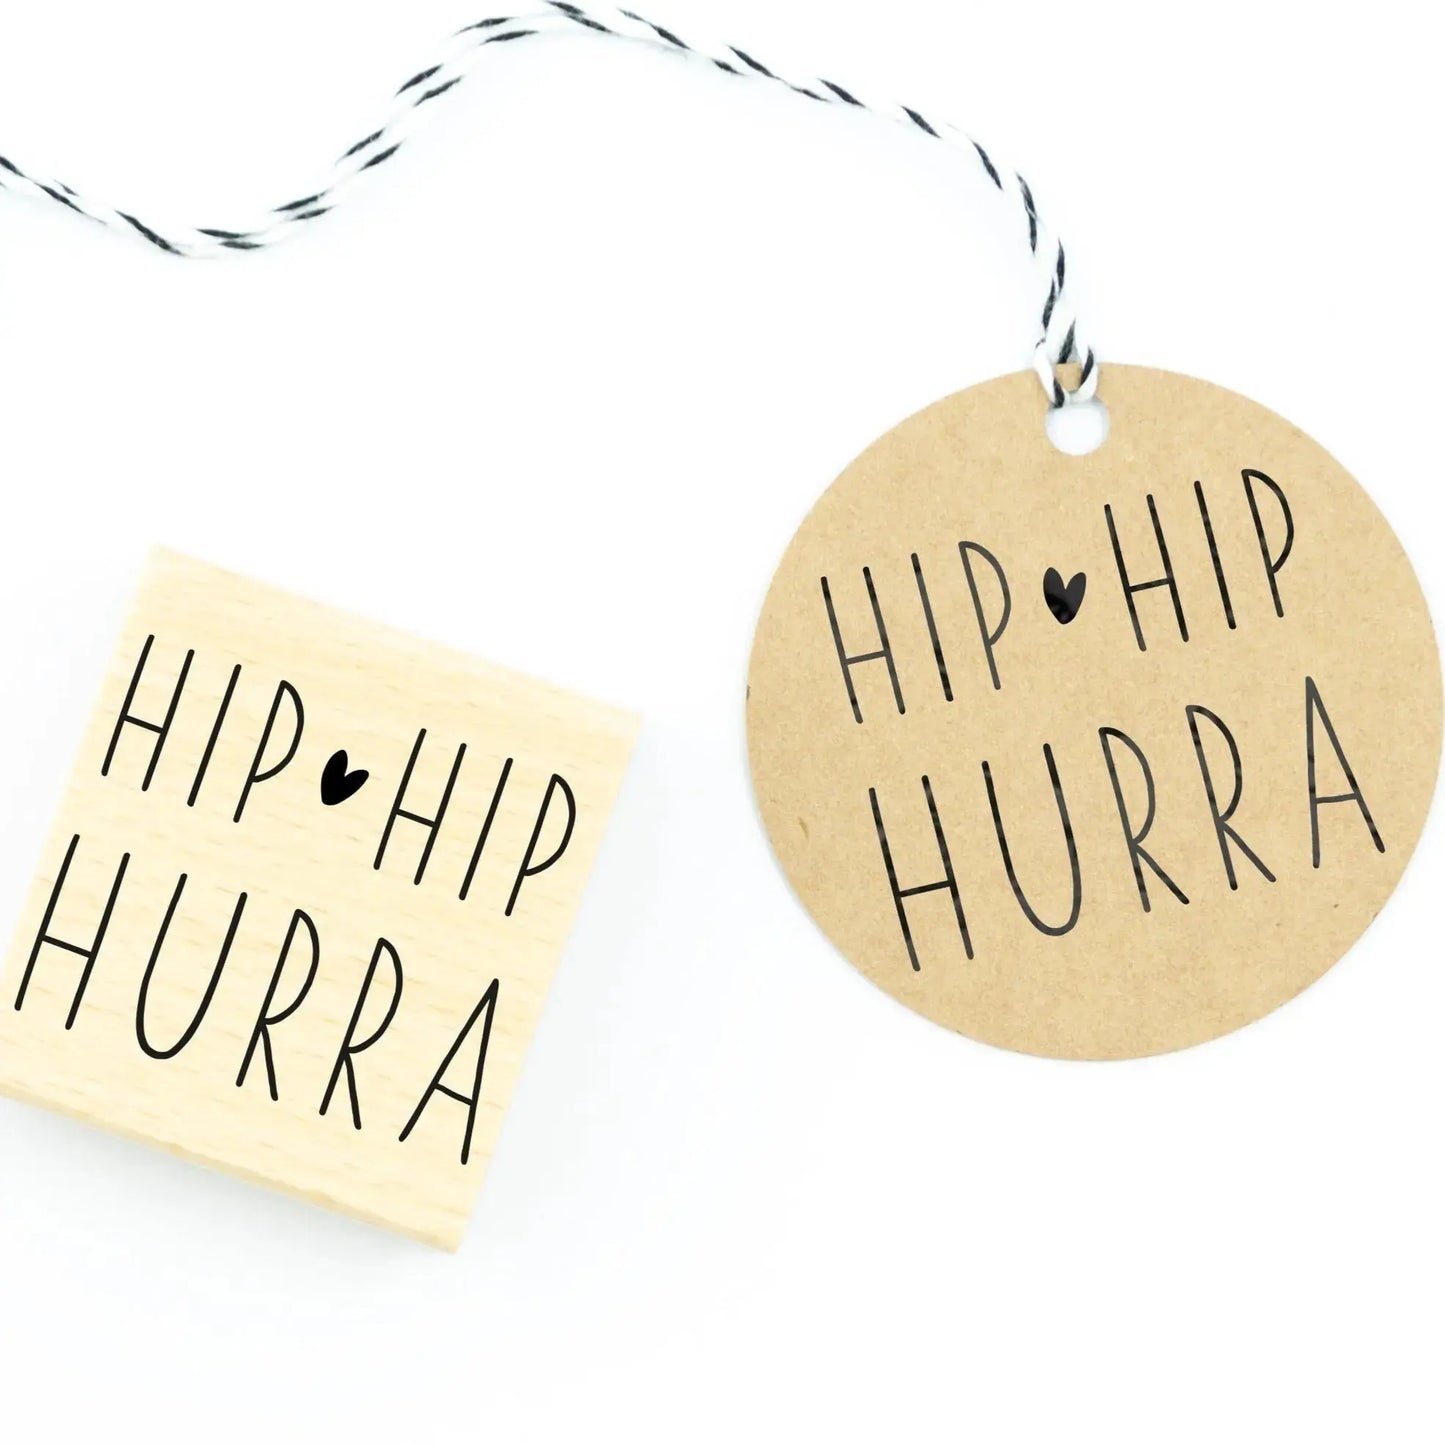 Stempel "HIP HIP HURRA" - IN LOVE WITH PAPER